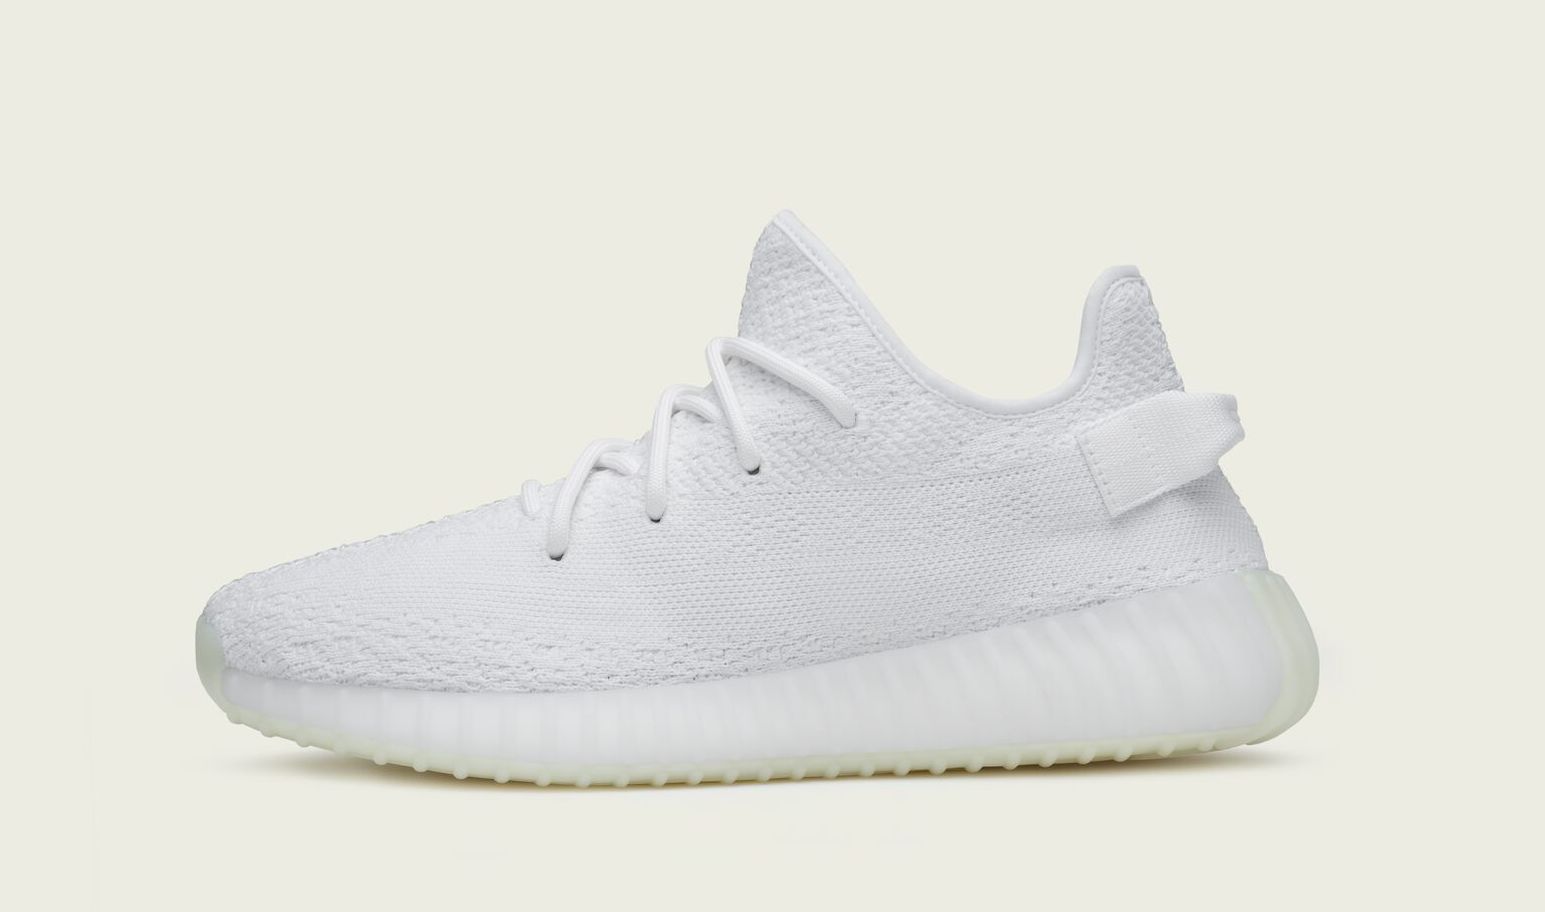 How to Get the 'Triple White' Yeezy Boost 350 V2 Now | Complex